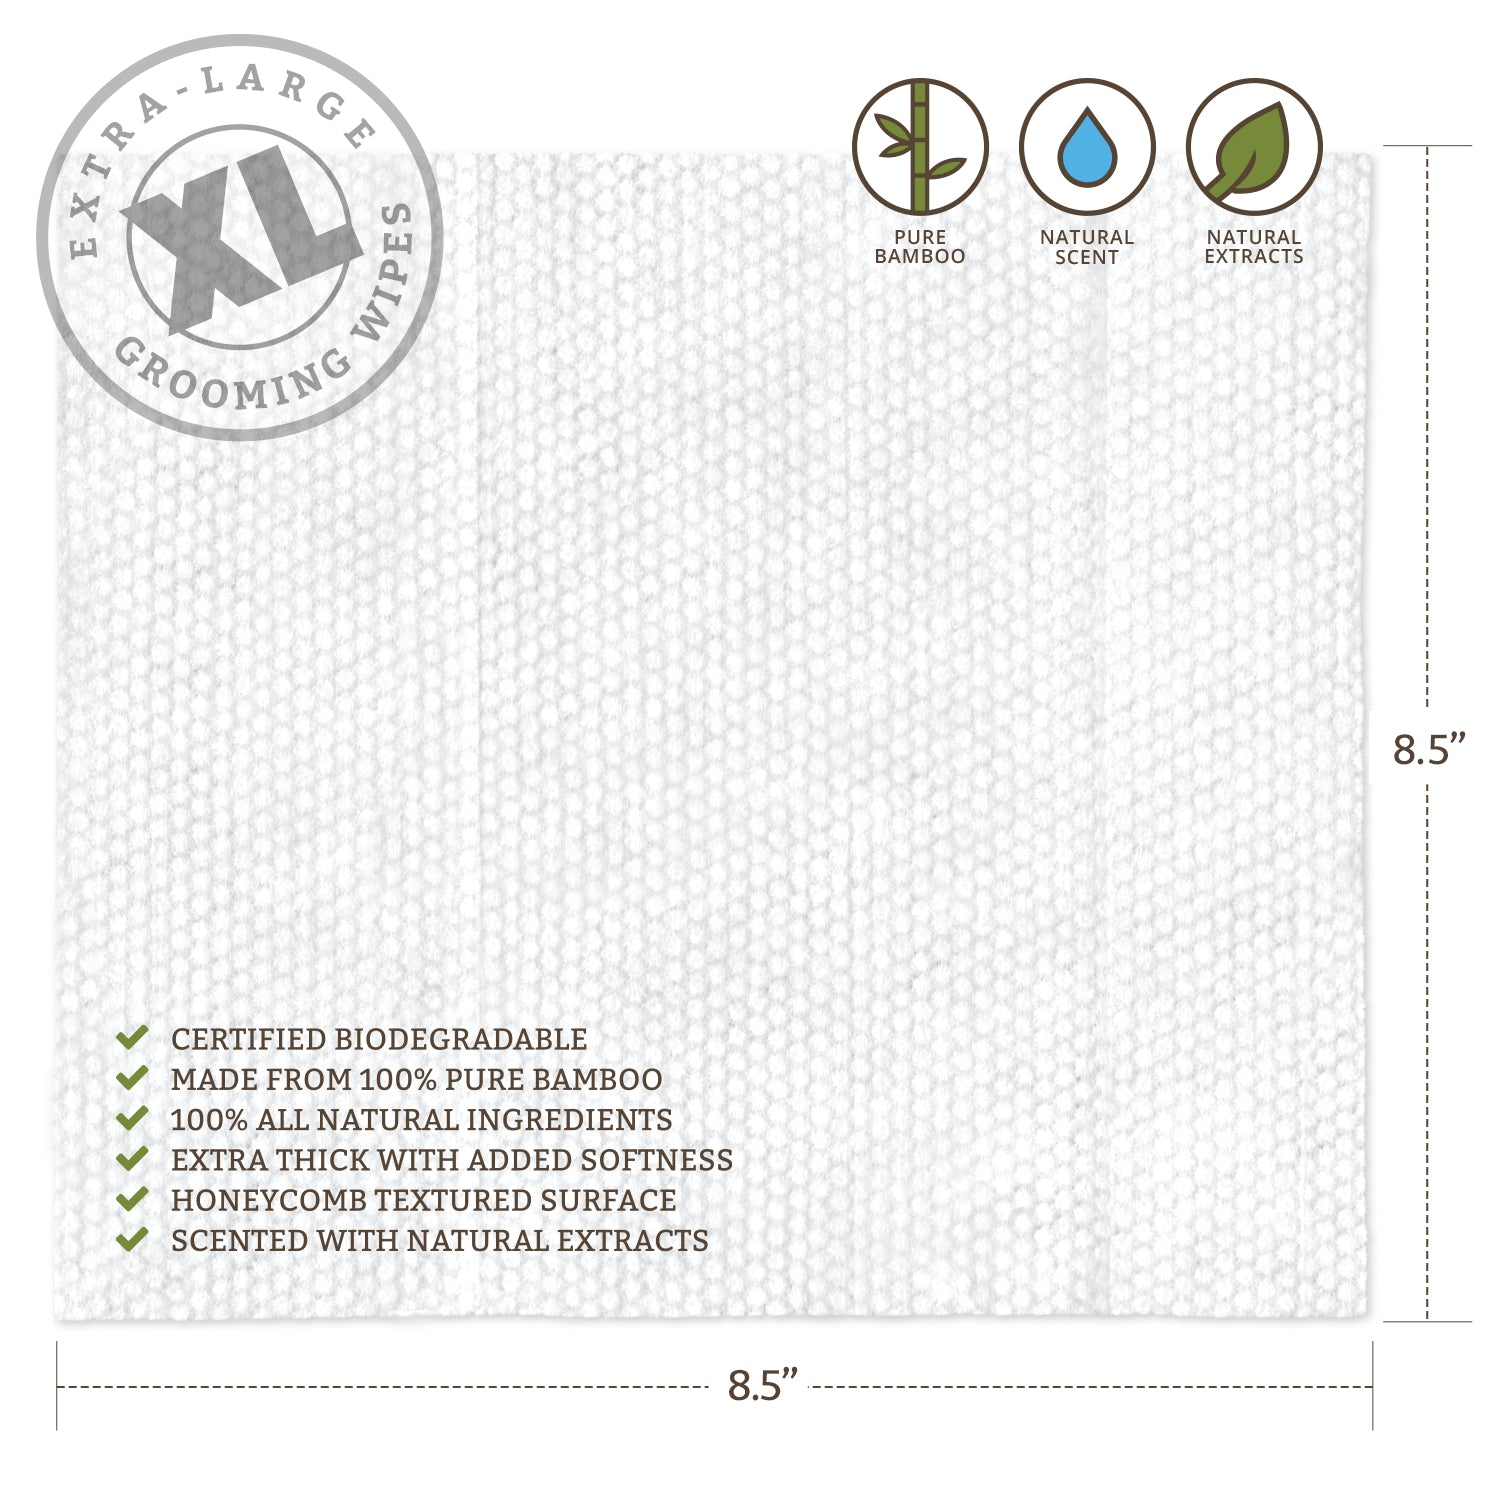 Biodegradable Grooming Wipes - Lavender Scent (180 Wipes)